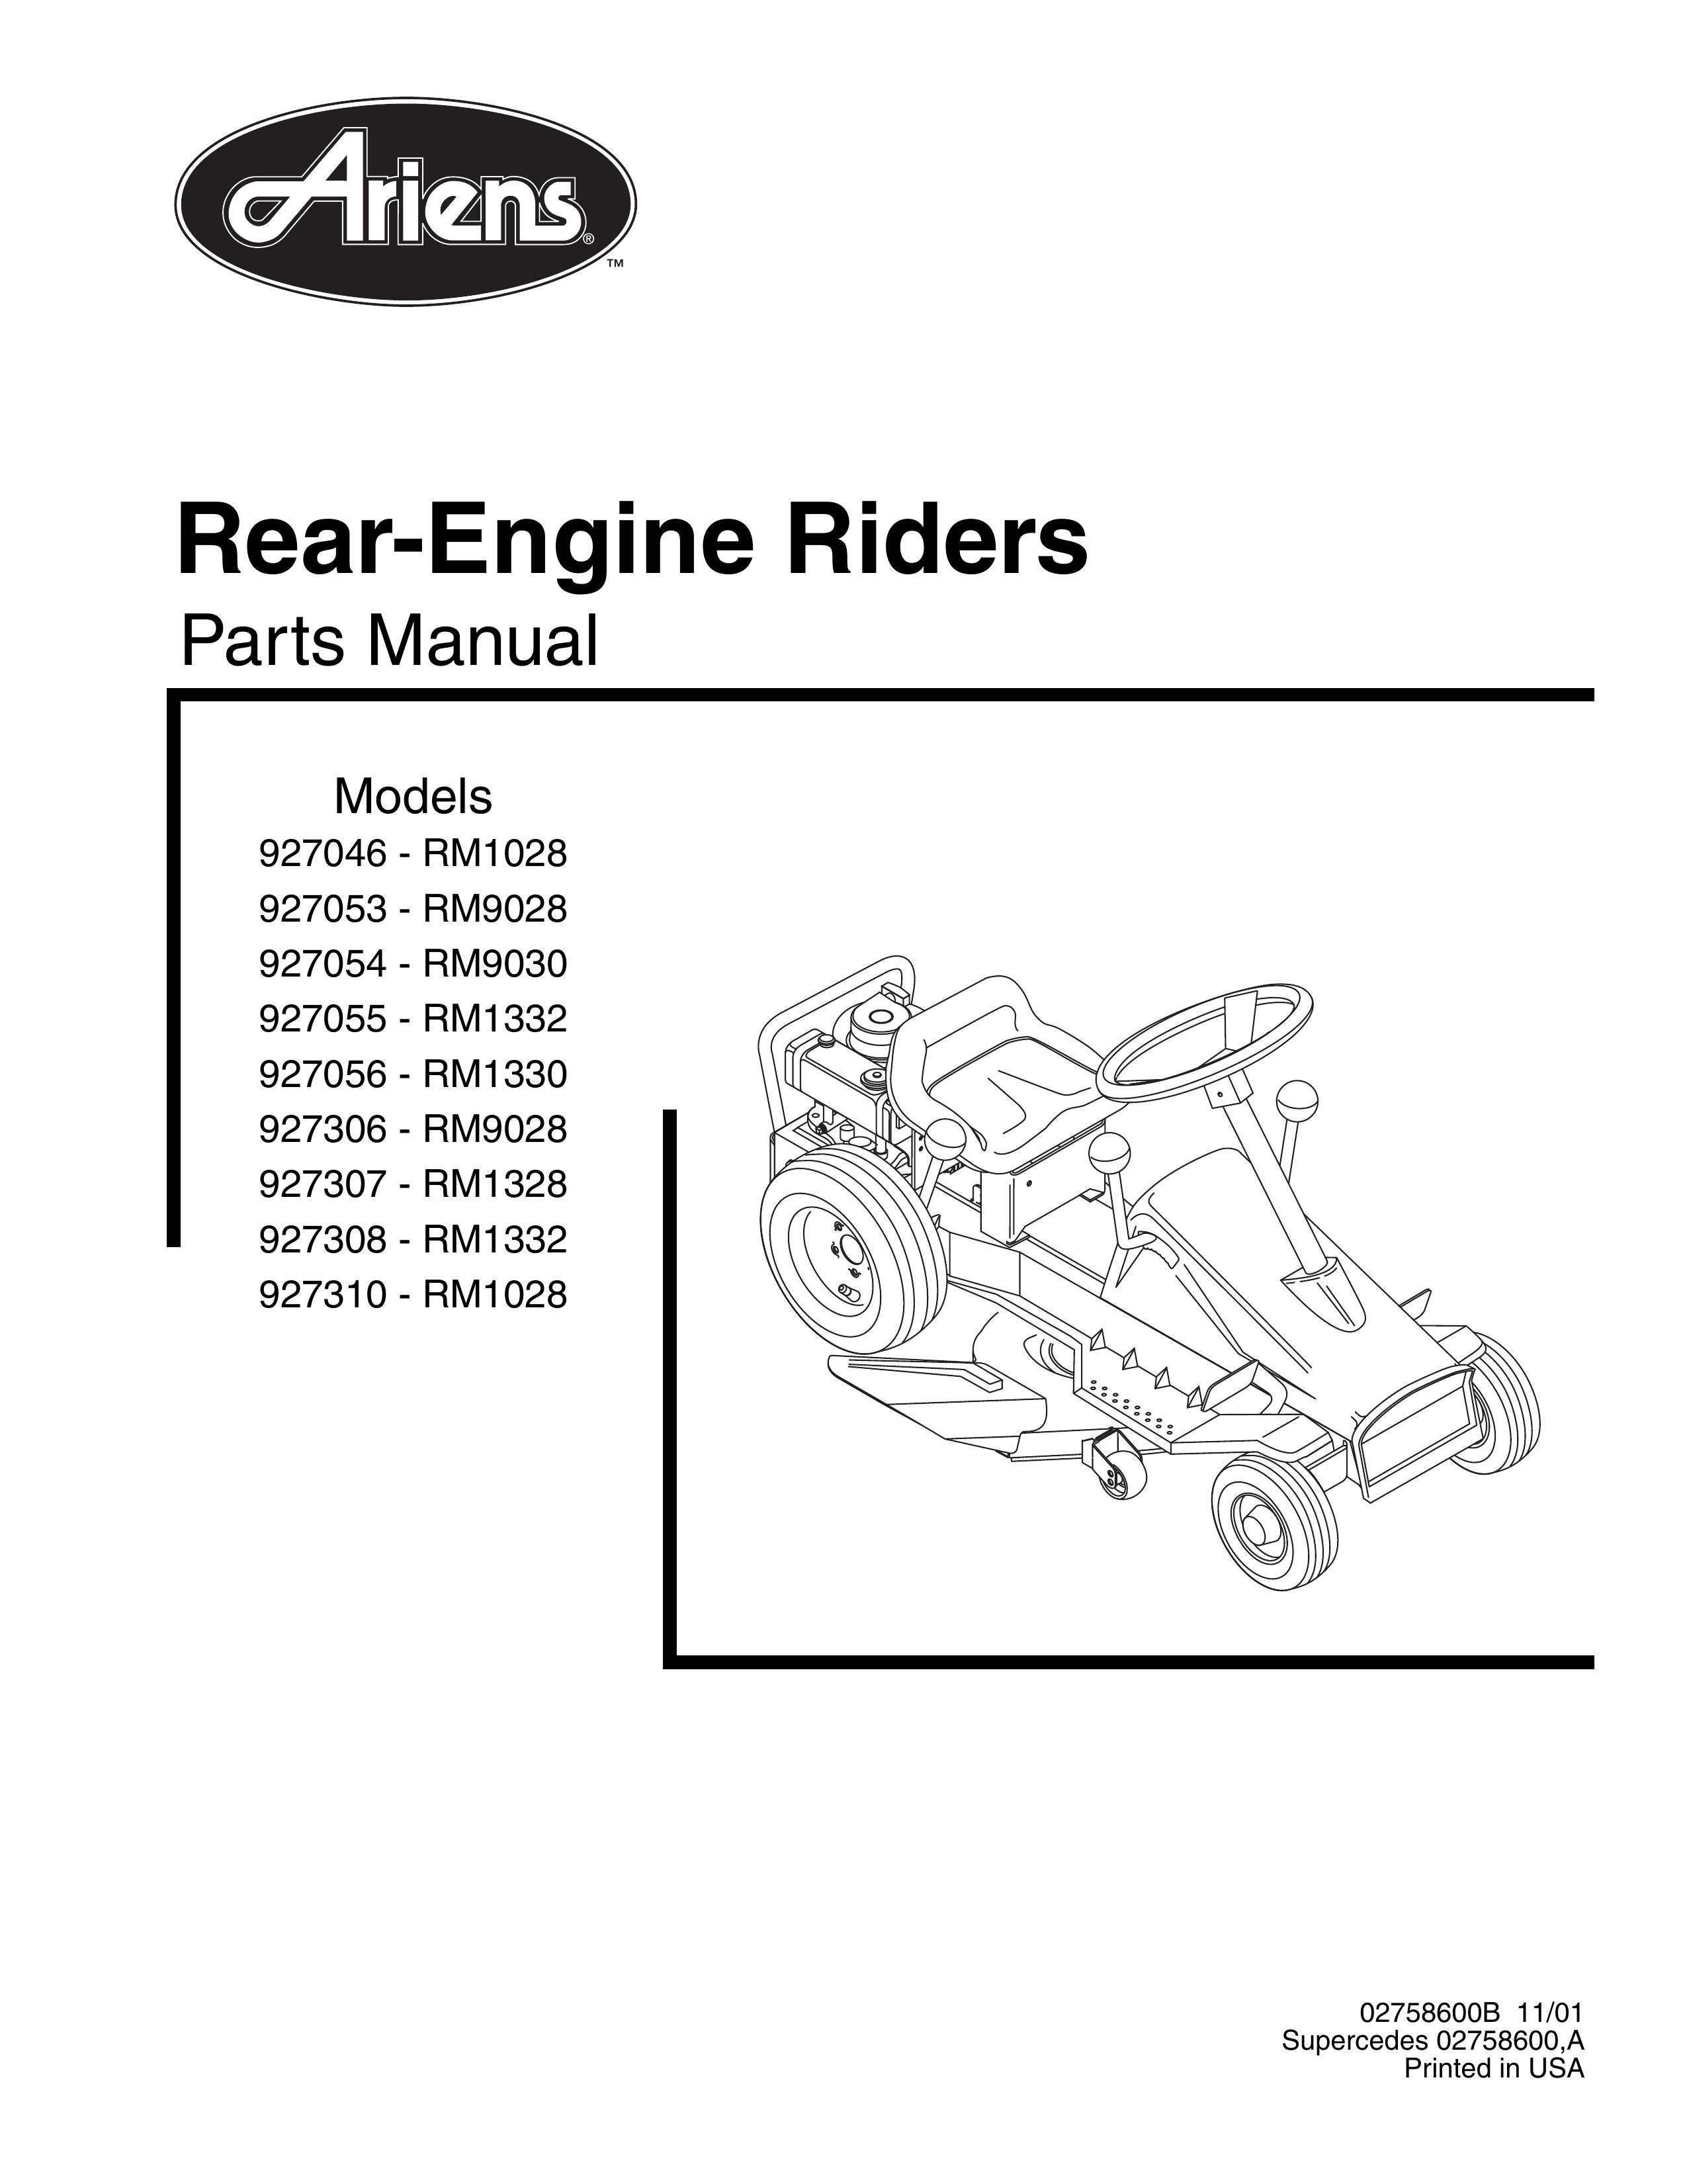 Ariens 927306 - RM9028 Camcorder User Manual